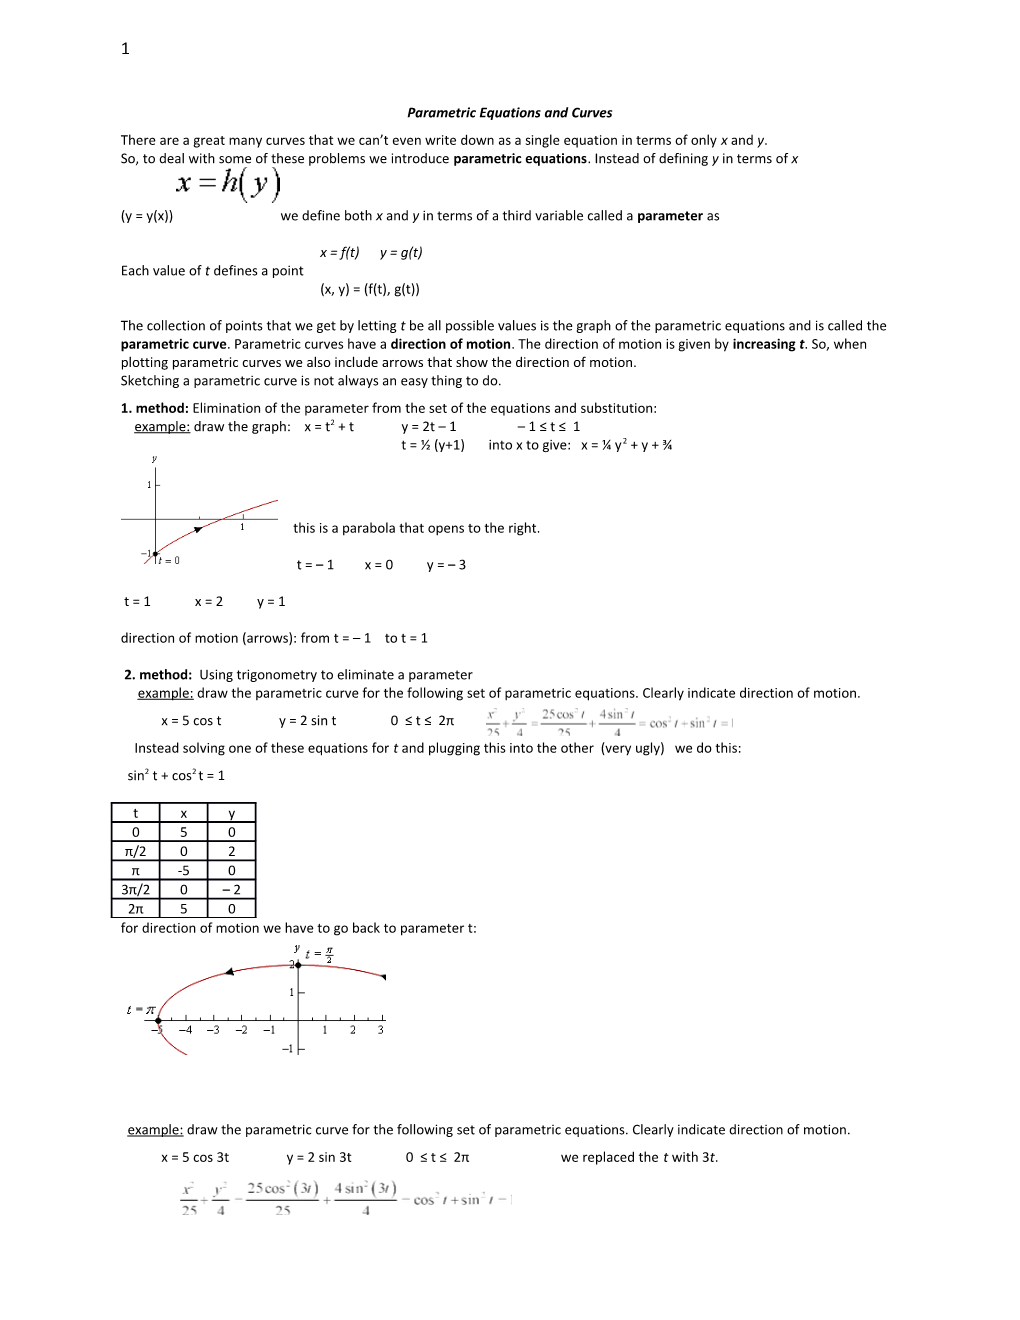 Parametric Equations and Curves